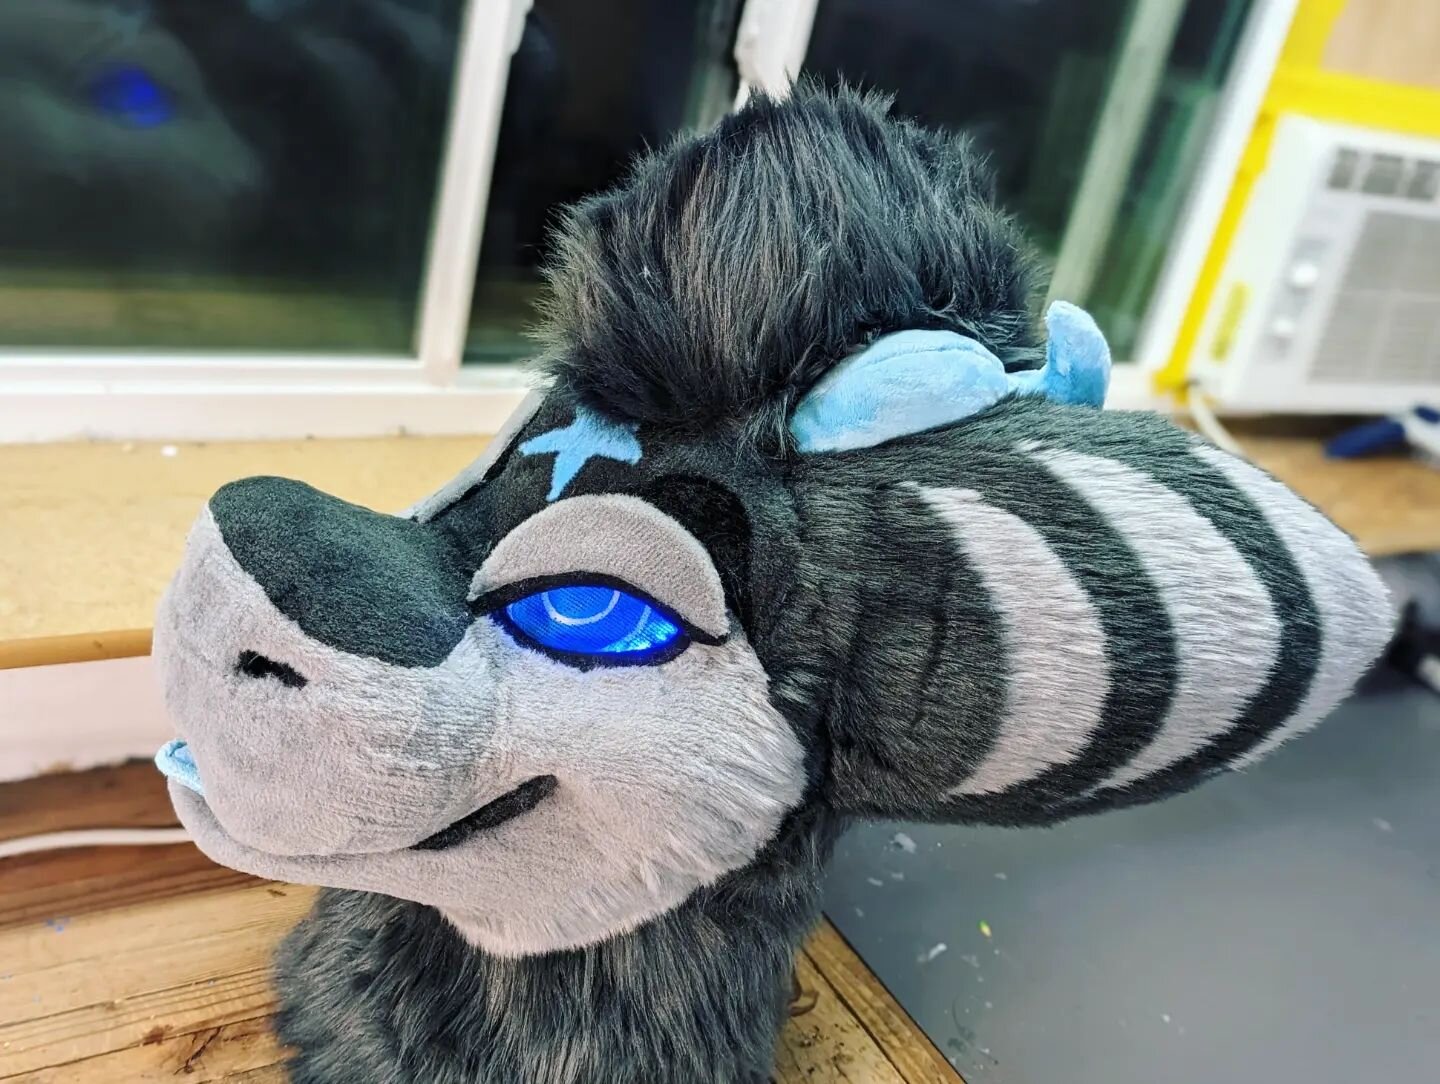 FINALLY got to work on another Wickerbeast! (And this one's got LED EYES!!!)

Such a rad character, huge thanks again to Da Vinci for commissioning me for this 💙

Headbase by @kawanii_the_manokit